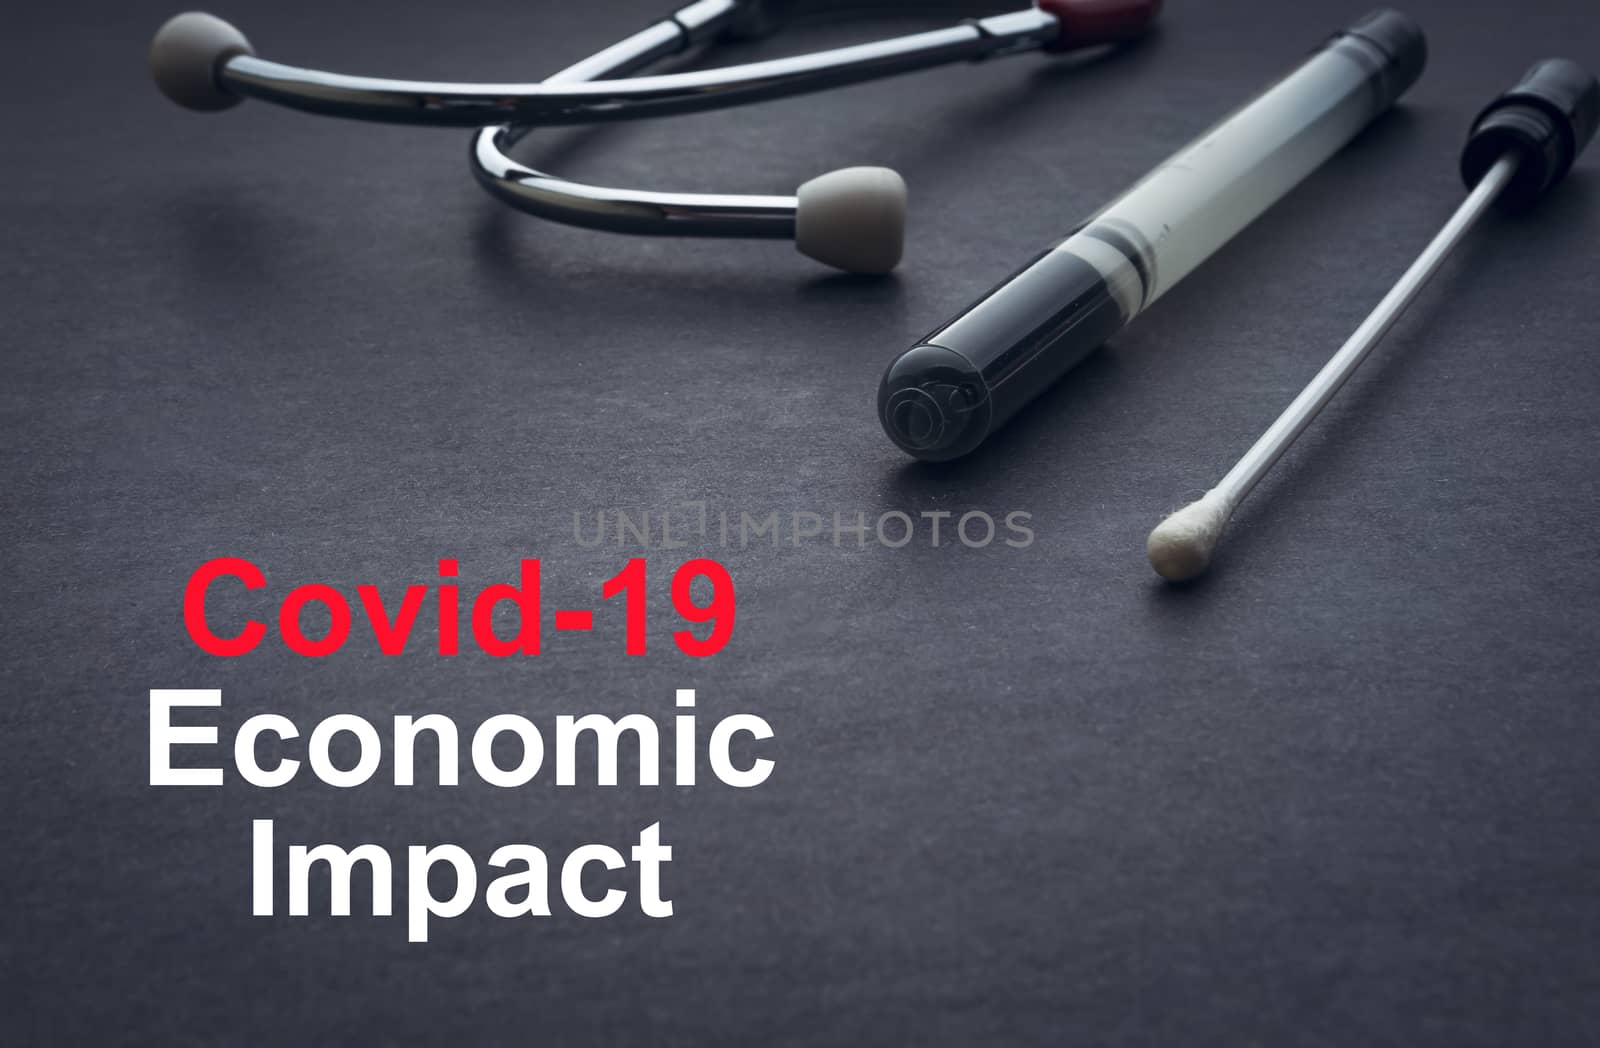 COVID-19 or CORONAVIRUS ECONOMIC IMPACT text with stethoscope and medical swab on black background by silverwings